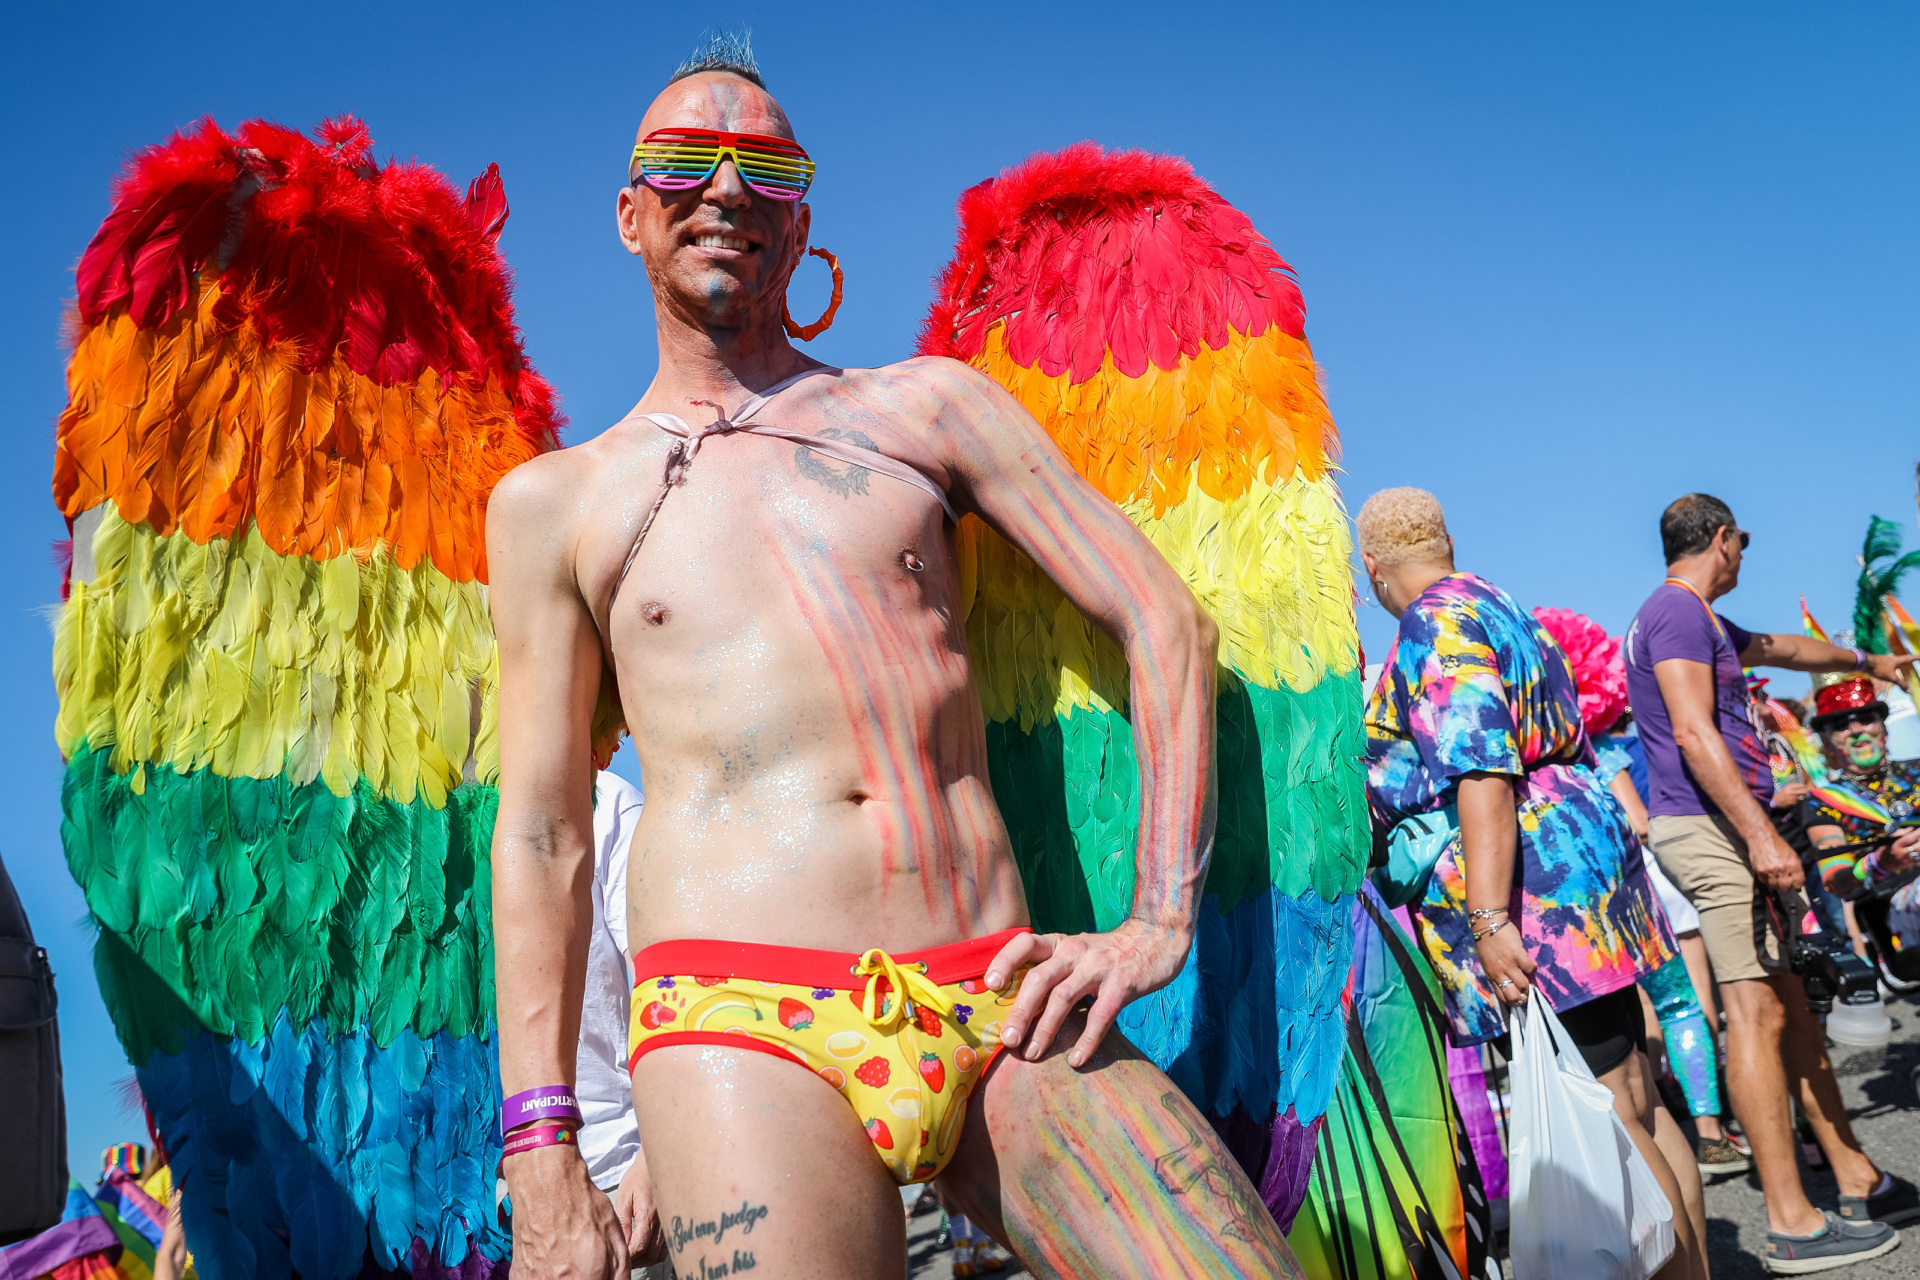 BRIGHTON, England - AUGUST 06: A festival goer stands at the Pride LGBTQ + Community Parade - 'Love, Protest & Unity' during Brighton Pride on August 6, 2022 in Brighton, England.  (Photo by Tristan Viewings/Getty Images)